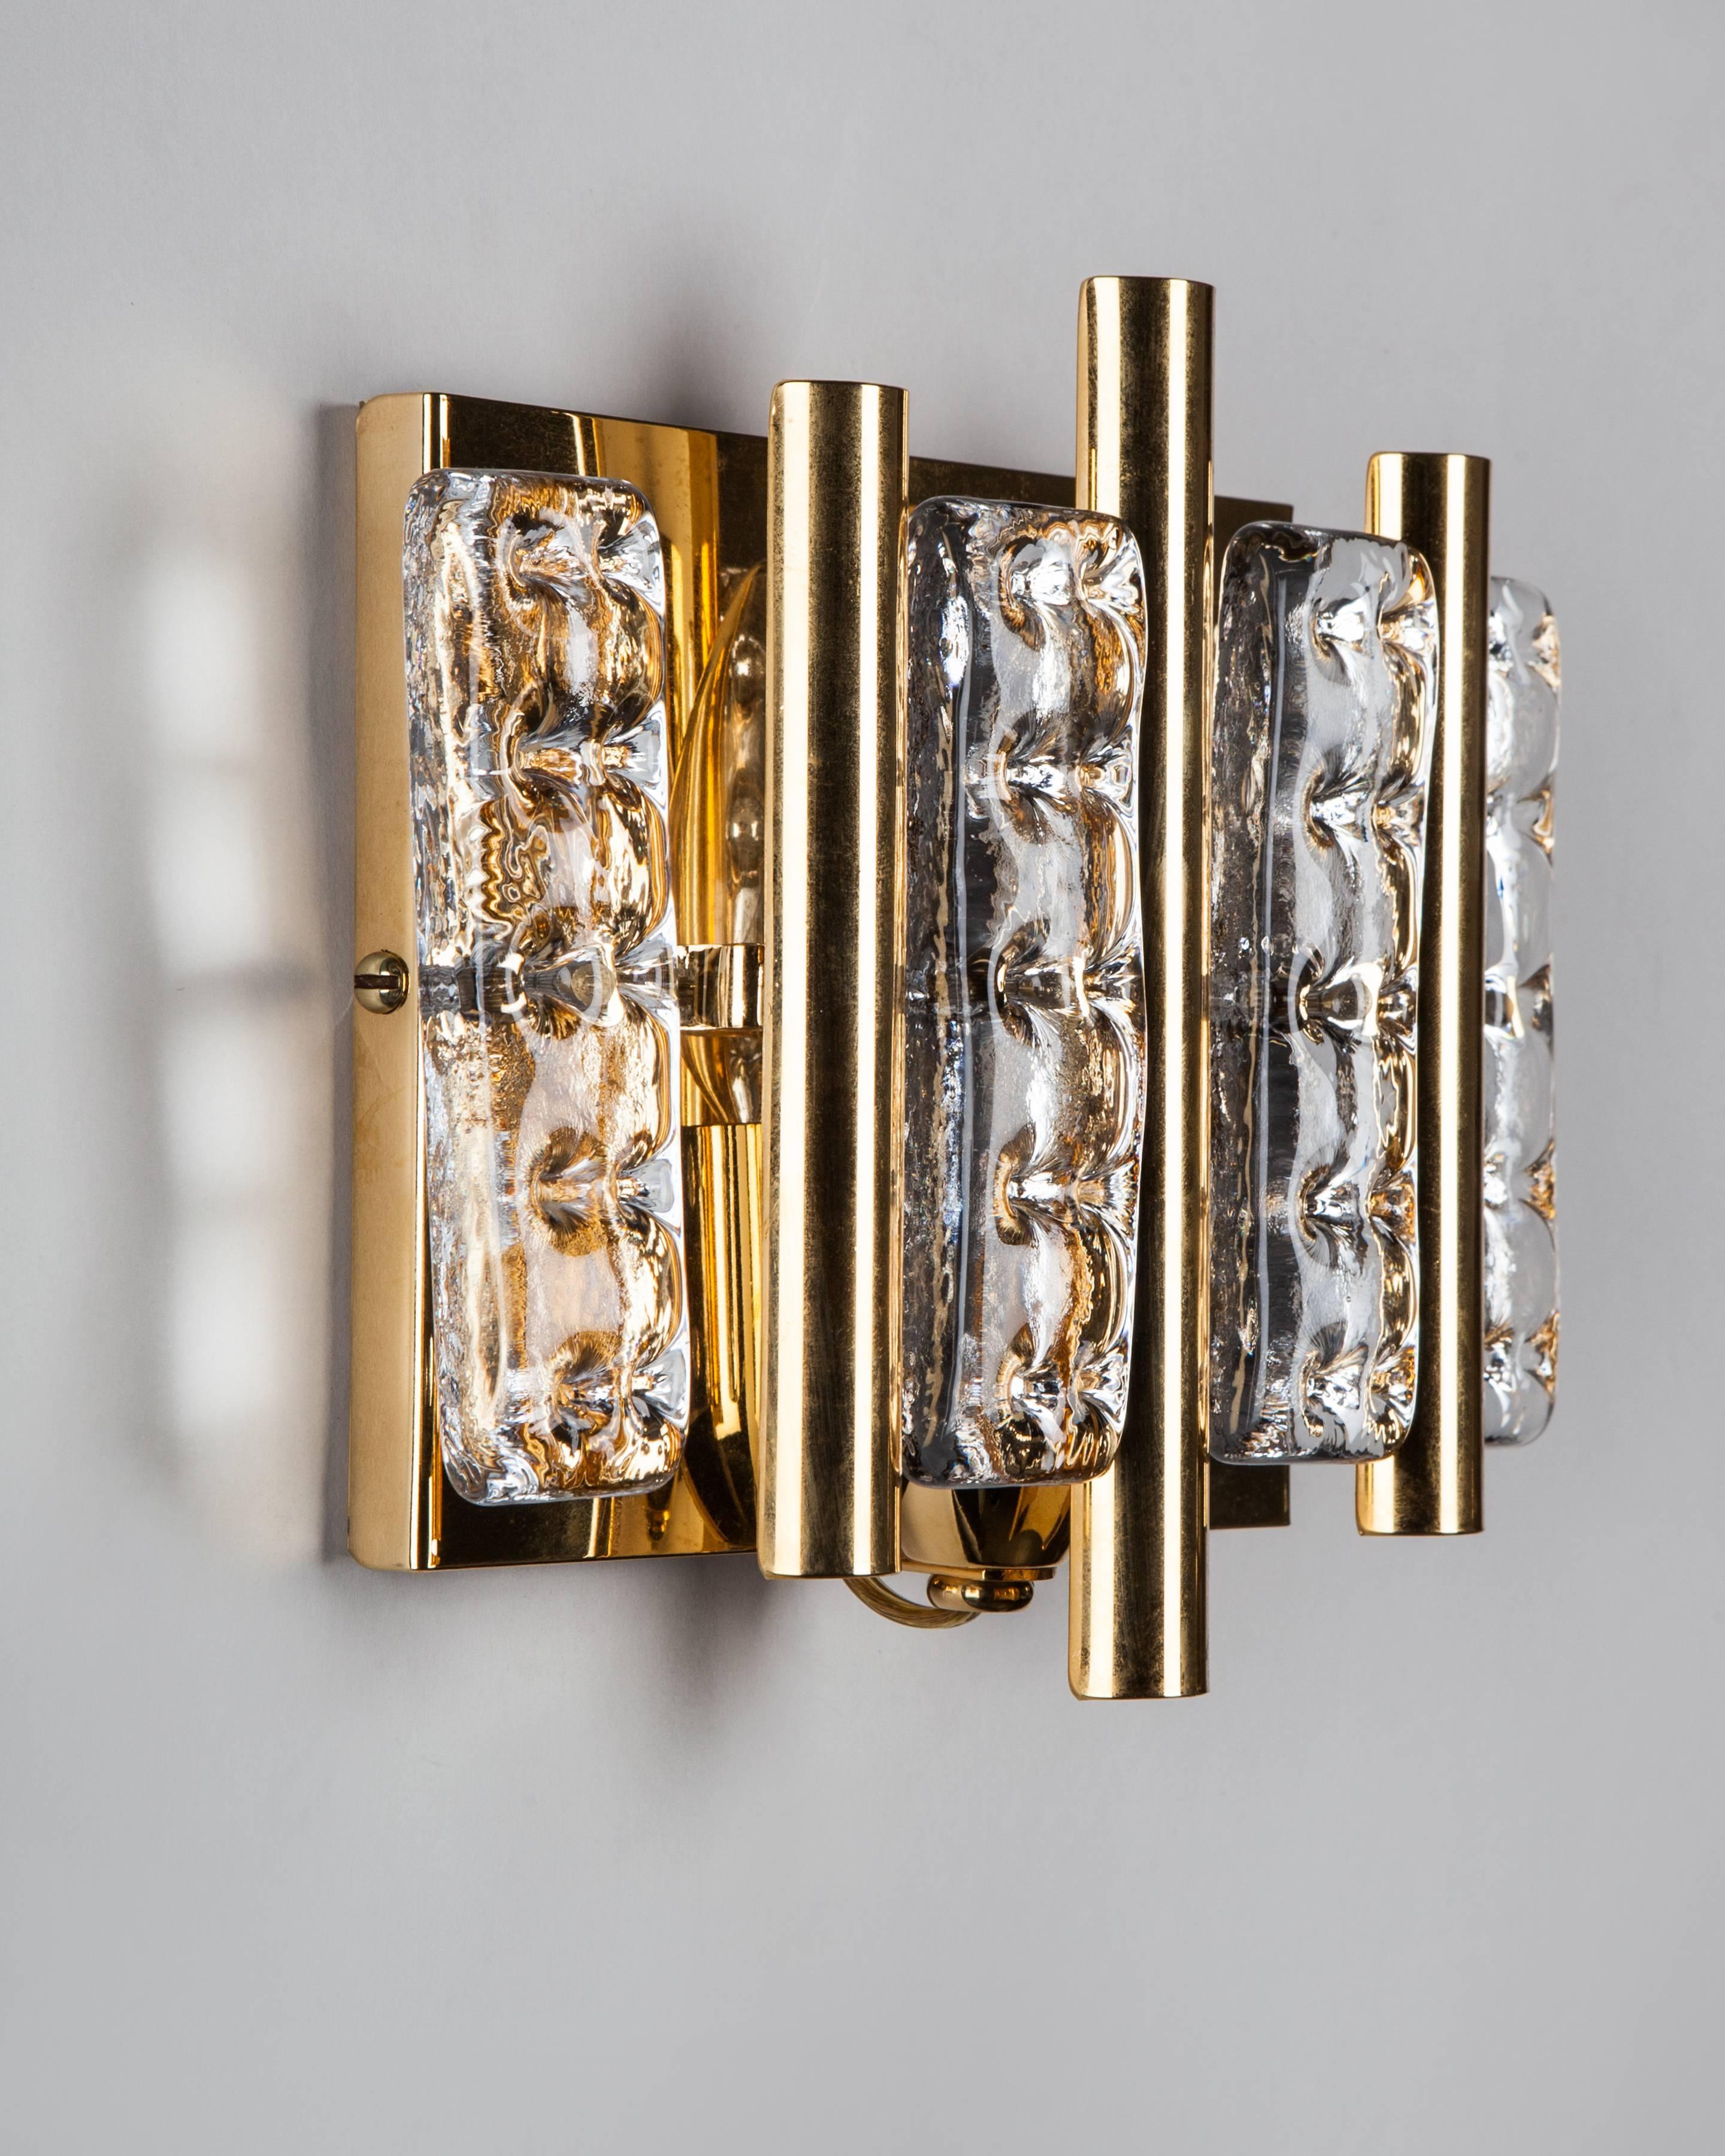 AIS3037
A pair of vintage sconces with dimpled, clear glass tiles on gilded frames. Attributed to the Swedish maker Flygsfors. Due to the antique nature of this fixture, there may be some nicks or imperfections in the